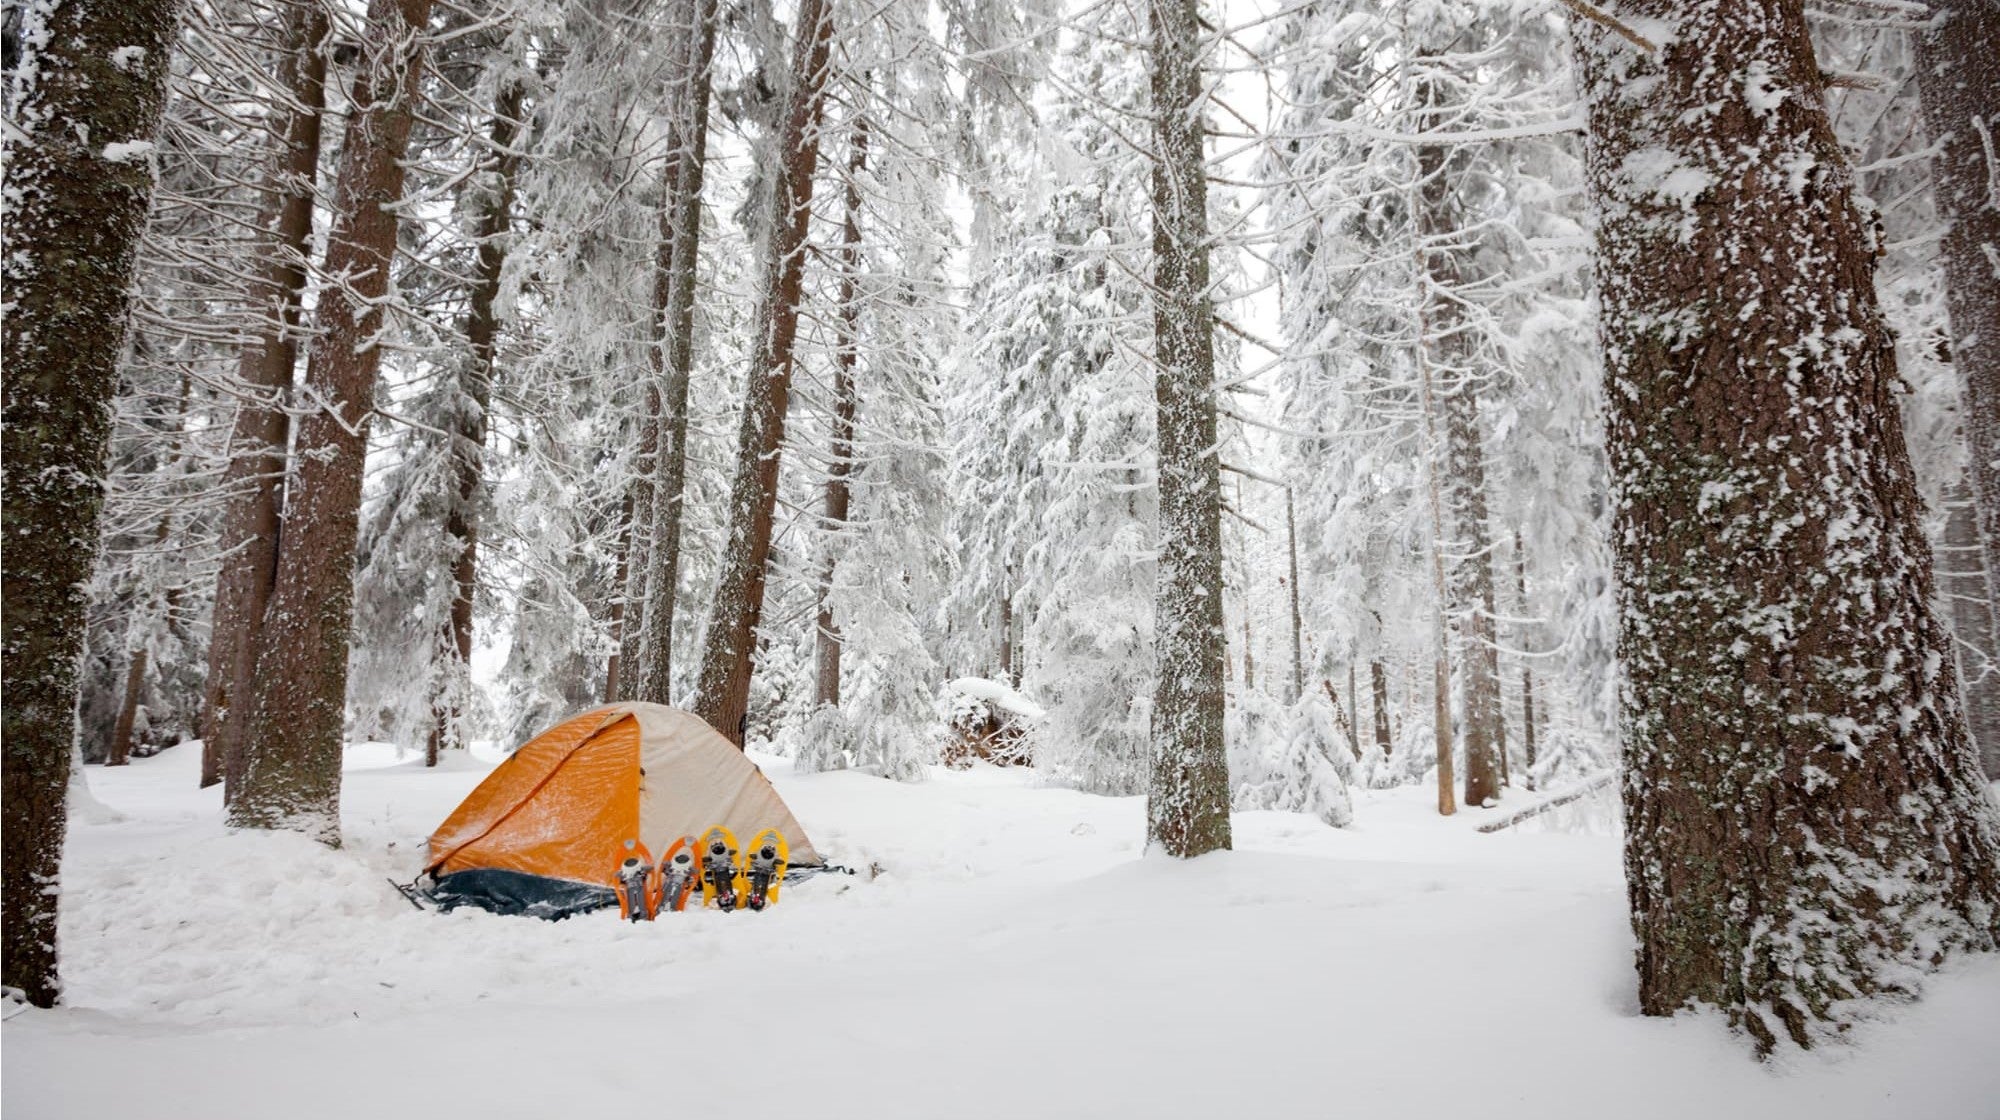 How To Plan The Best Wisconsin Winter Camping Trip